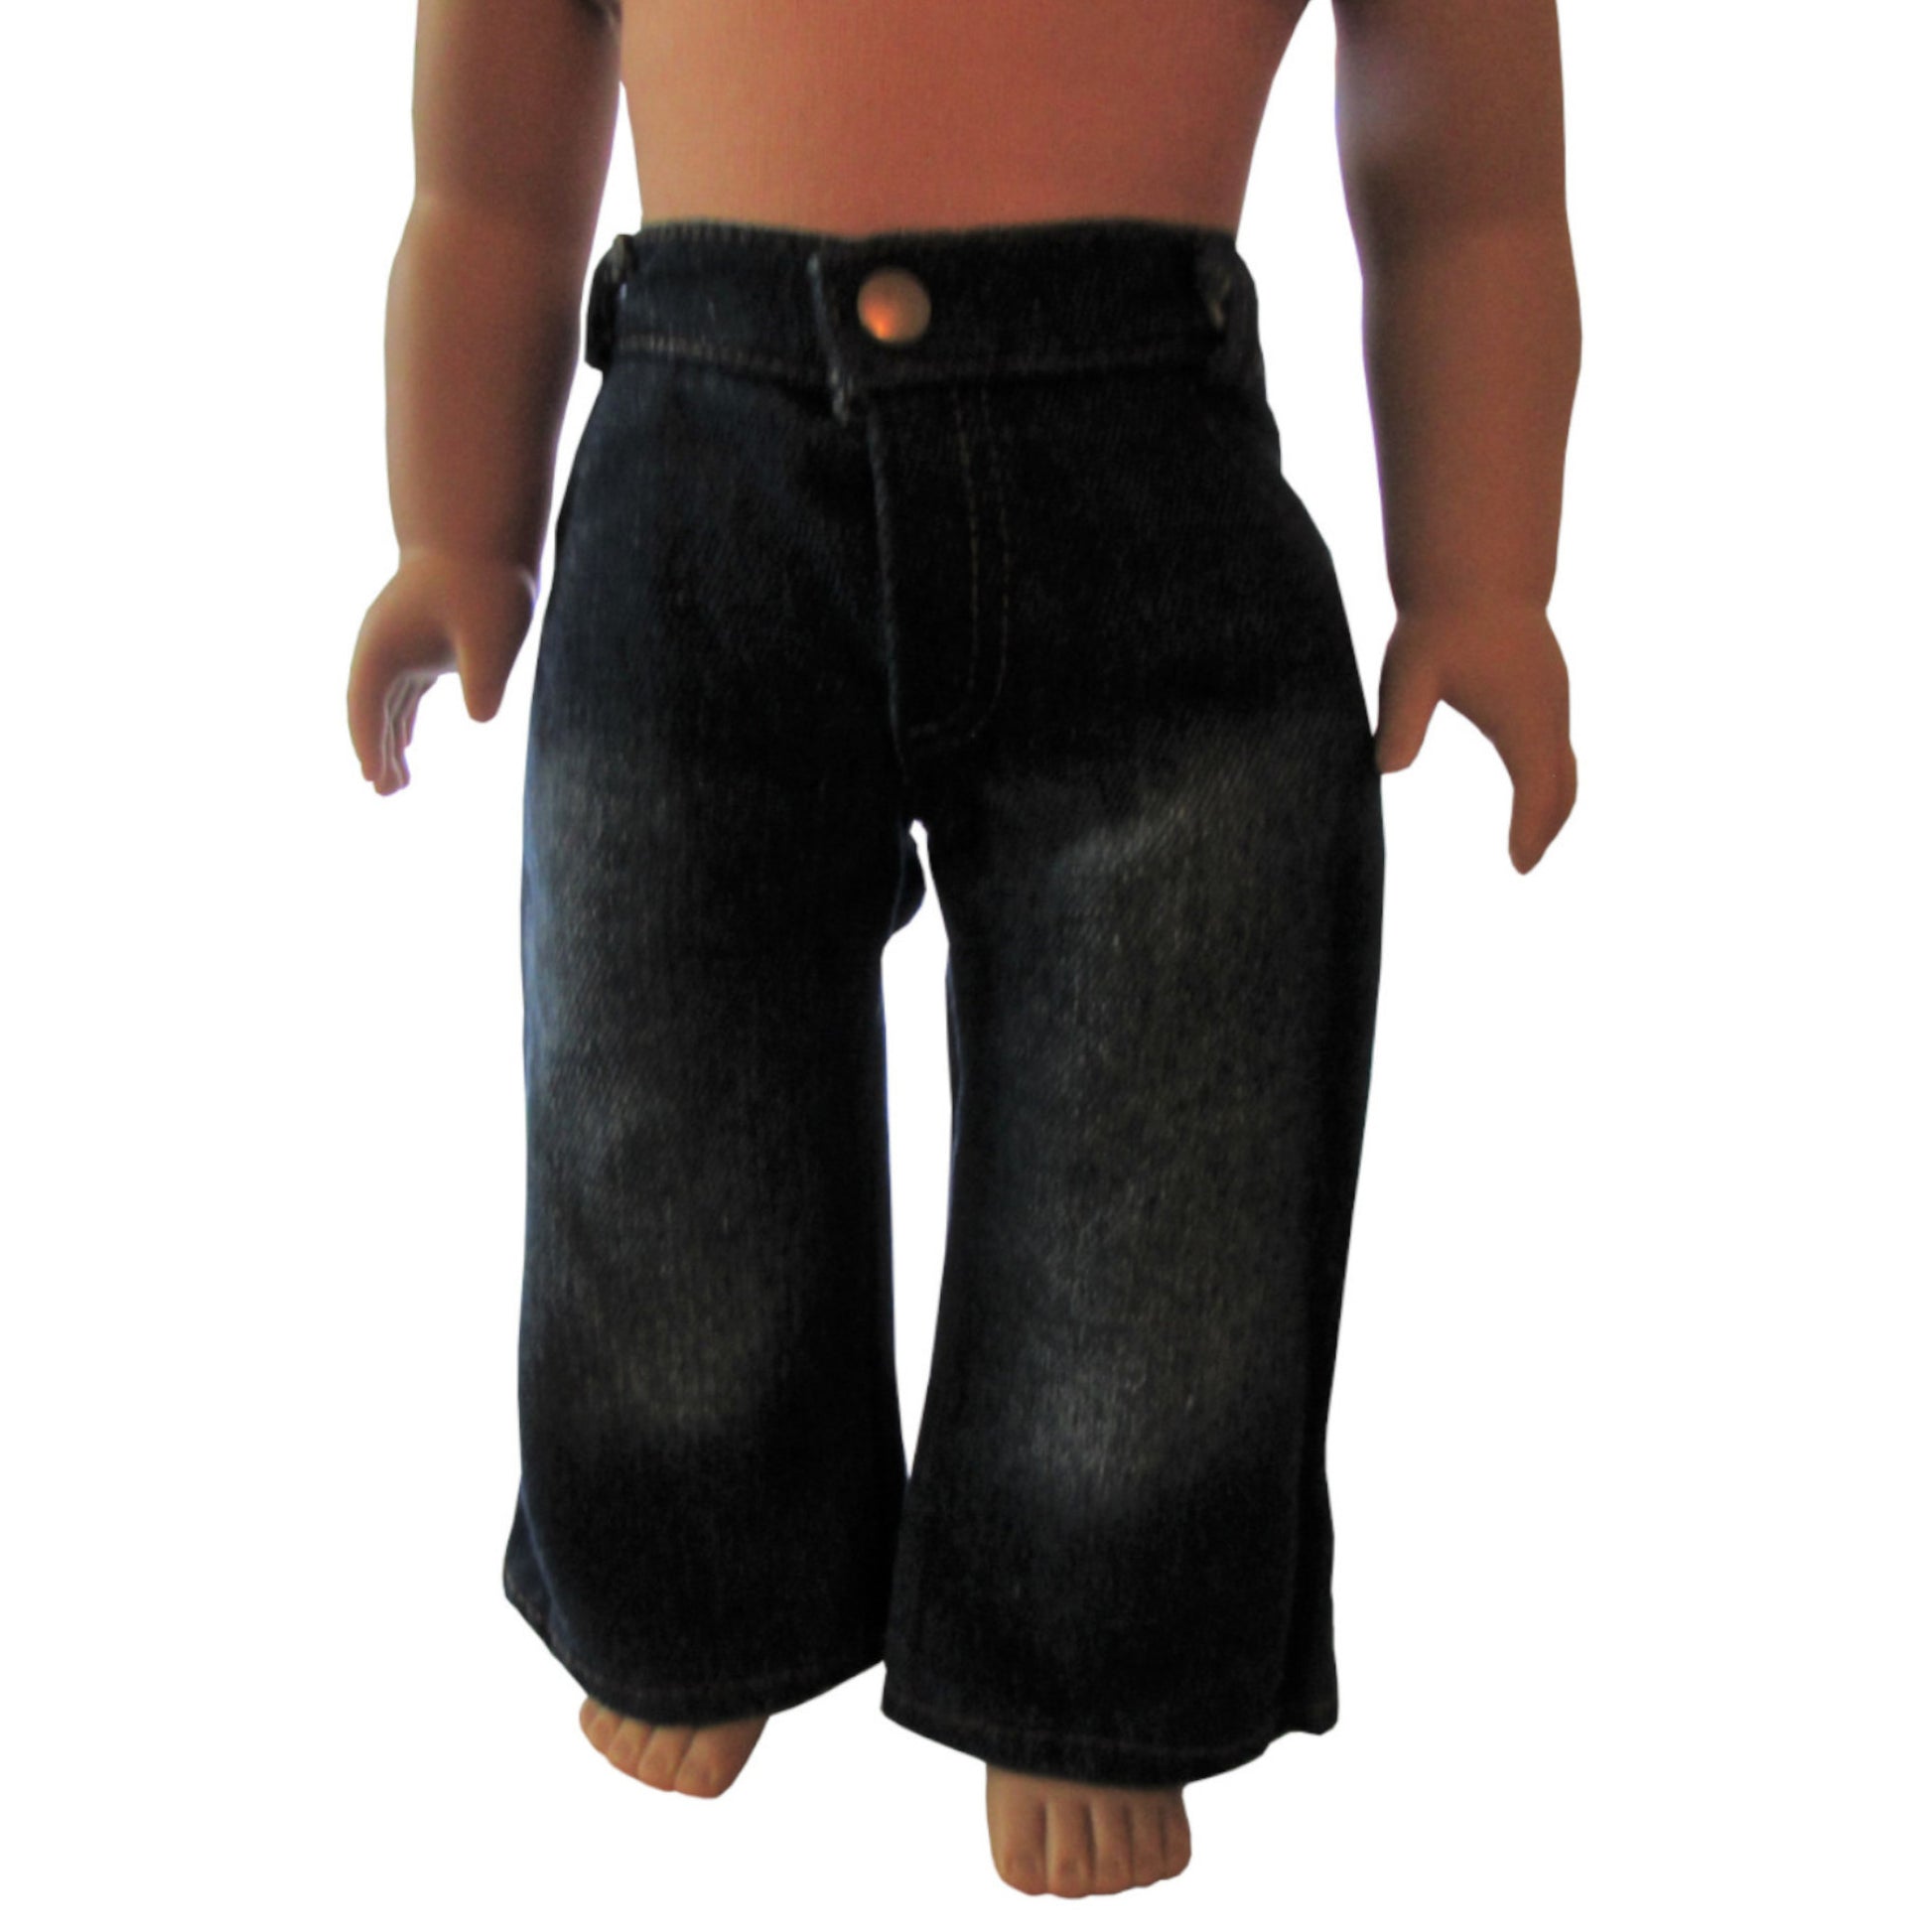 Distressed Doll Jeans for 18-inch dolls with doll